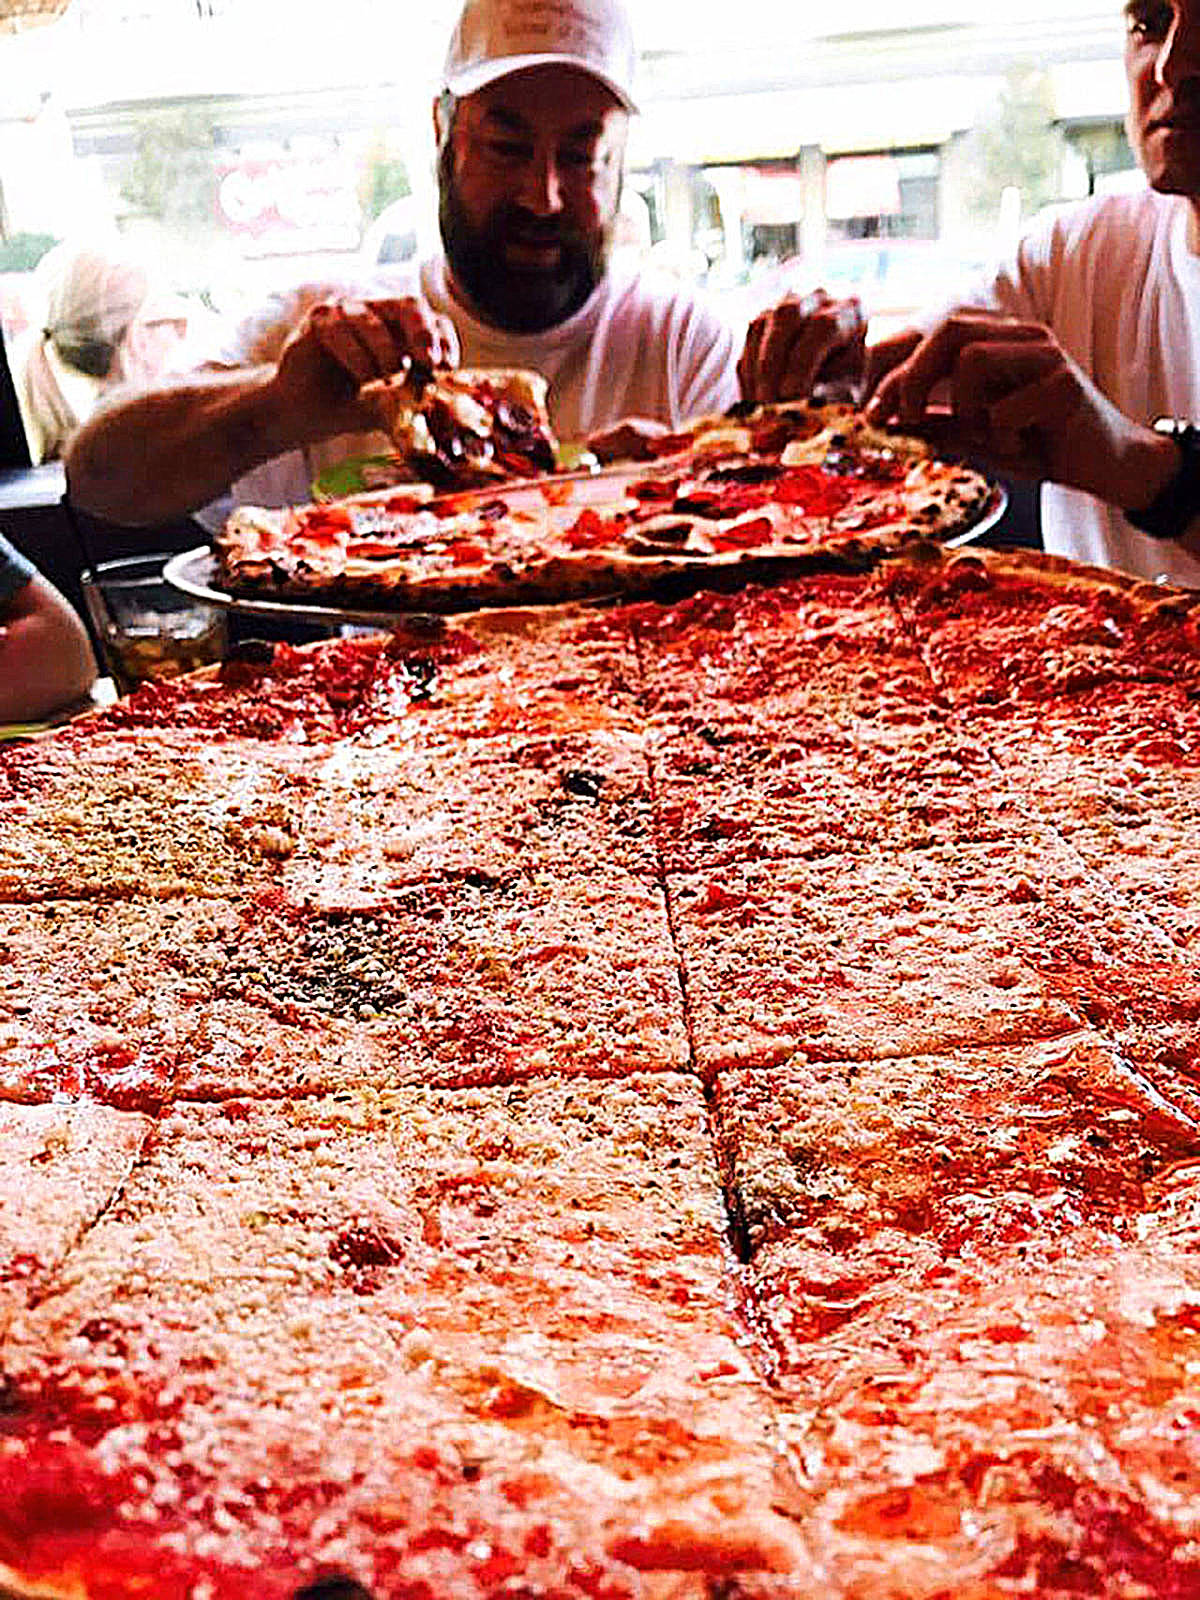 Photo courtesy of Will Grant | That’s A Some Pizza’s owner Will Grant does some tasty research during a trip to a prestigious pizza college in San Francisco in 2017. Earlier this year he competed at the World Pizza Championships in Parma, Italy, placing third for Americans overall (and the only high-ranked chef from the Pacific Northwest) in the Duo Competition, where he teamed up with Houston, Texas-based pizza master Nicole Bean.                                 Photo courtesy of Will Grant | That’s A Some Pizza’s owner Will Grant does some tasty research during a trip to a prestigious pizza college in San Francisco in 2017. Earlier this year he competed at the World Pizza Championships in Parma, Italy, placing third for Americans overall (and the only high-ranked chef from the Pacific Northwest) in the Duo Competition, where he teamed up with Houston, Texas-based pizza master Nicole Bean.